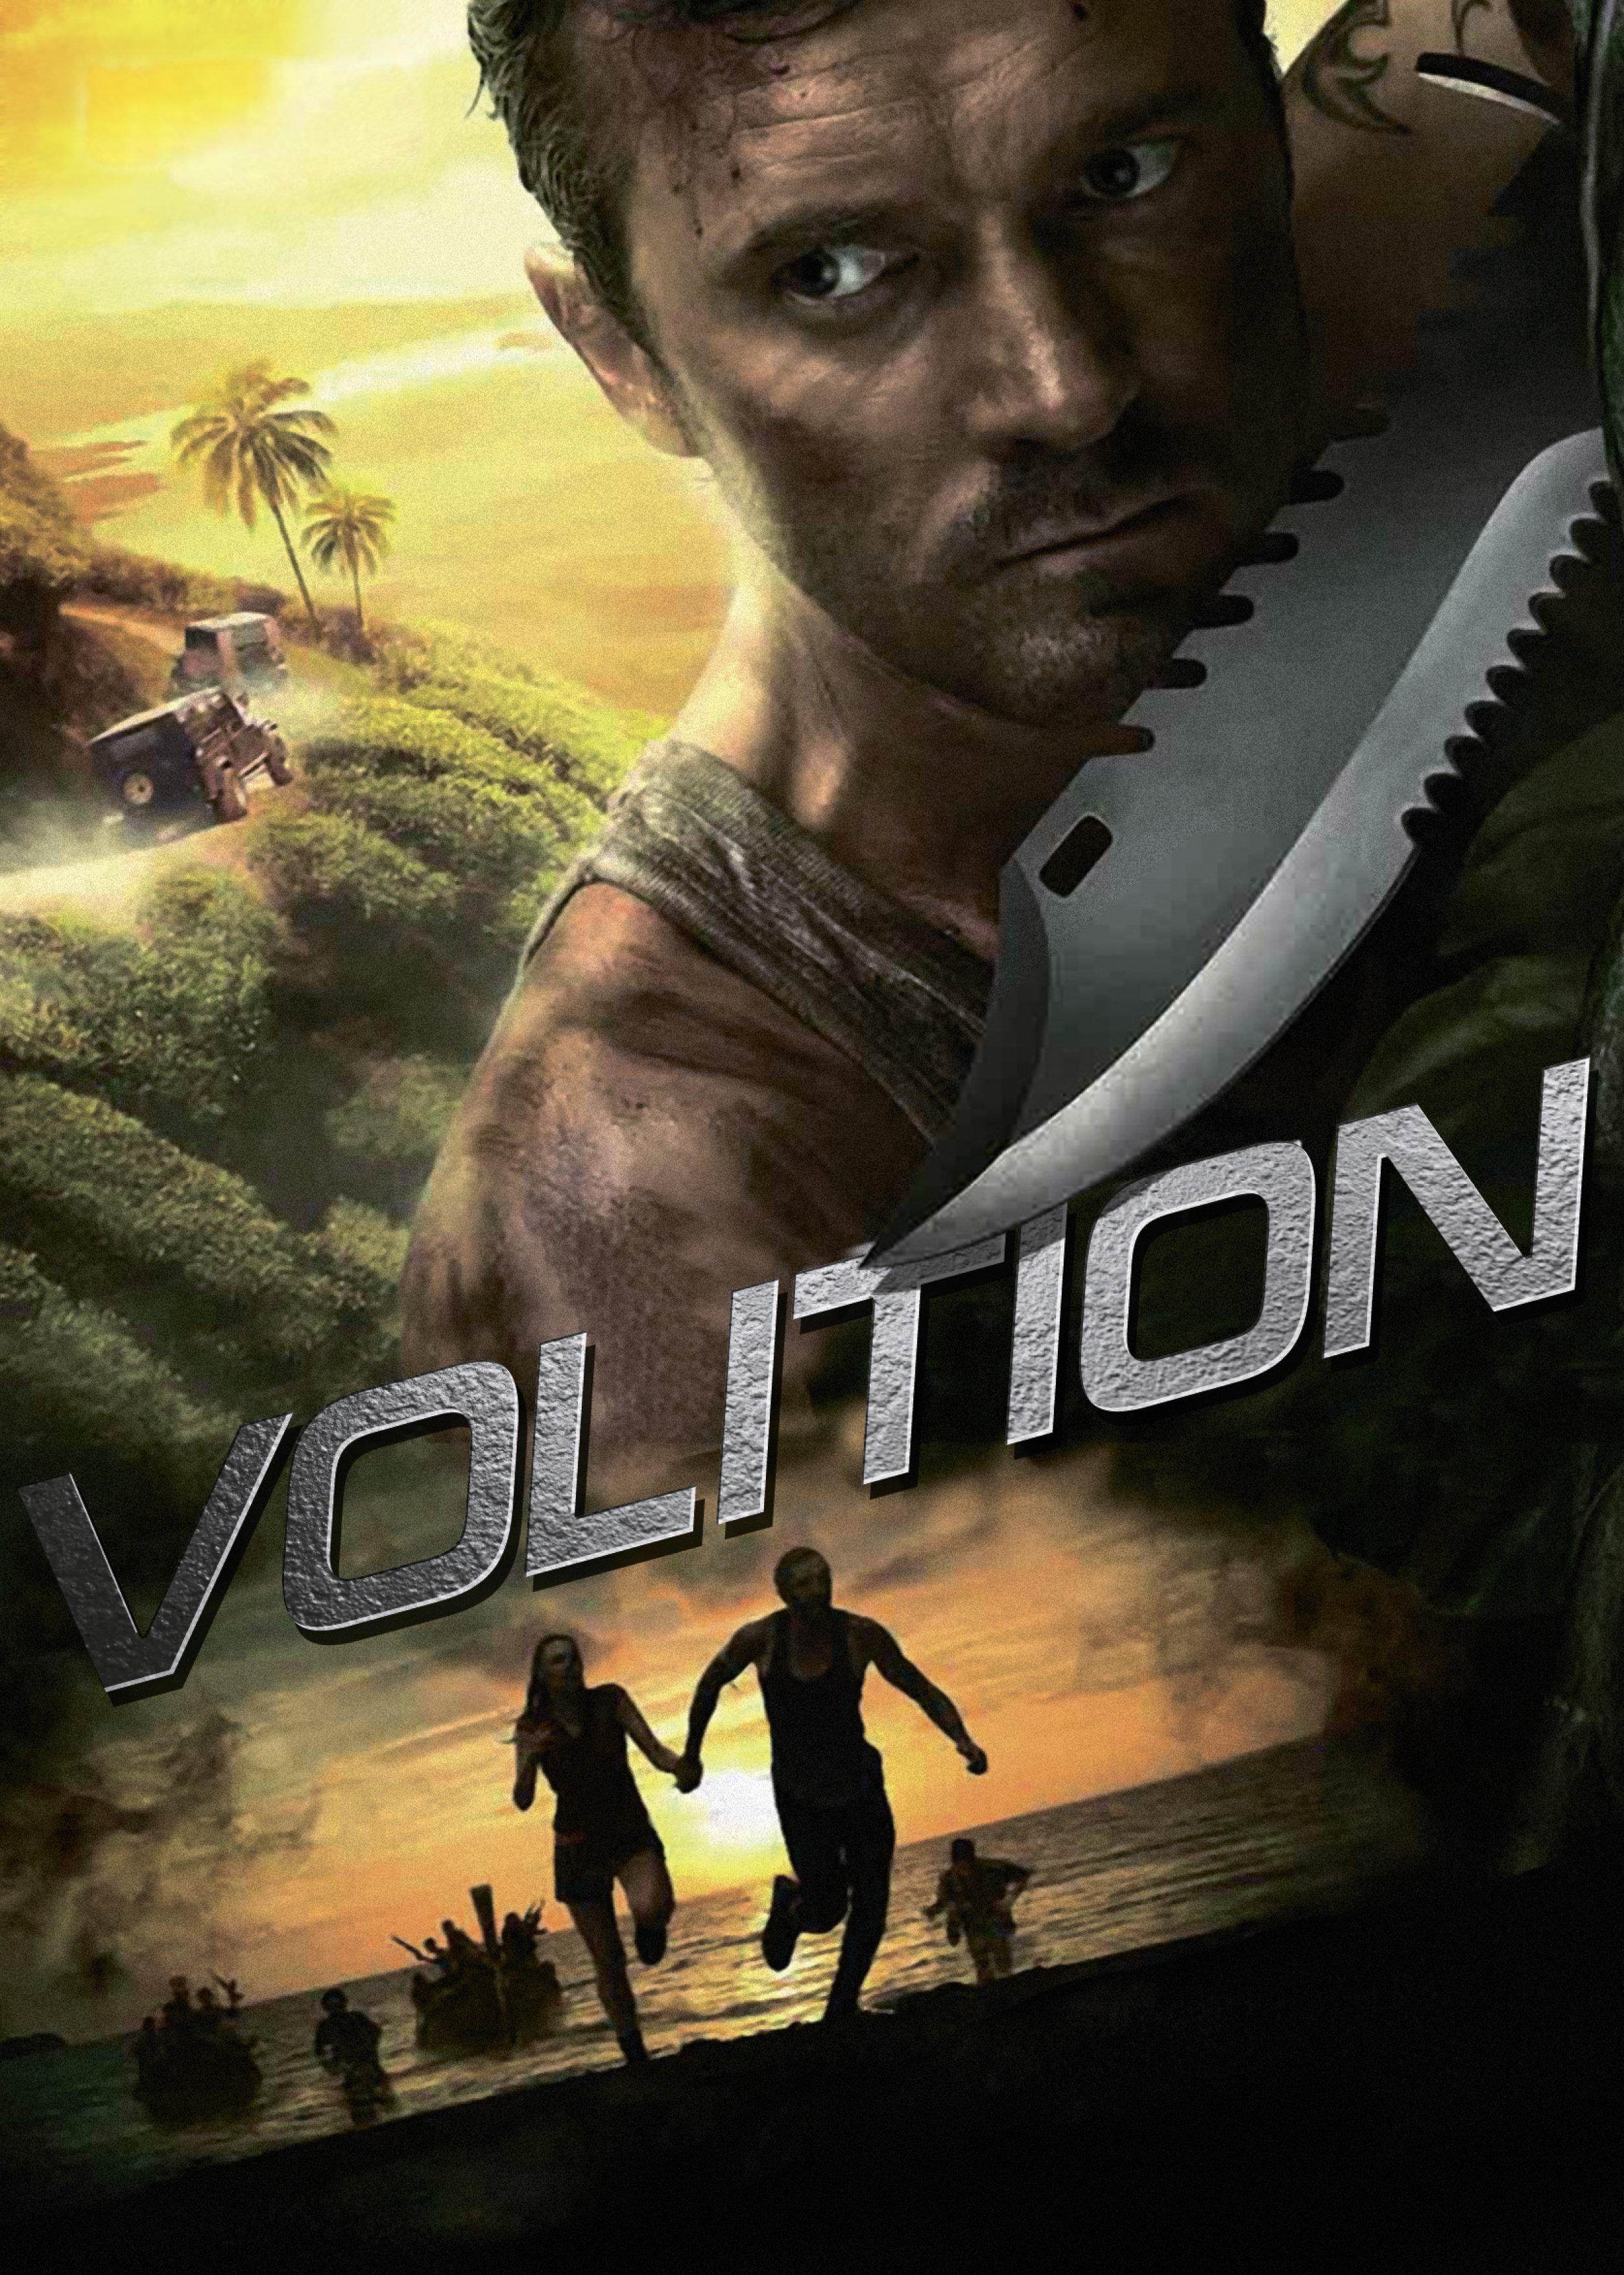 RUSSIAN ACTION SERIES "VOLITION" TO AIR IN TAIWAN